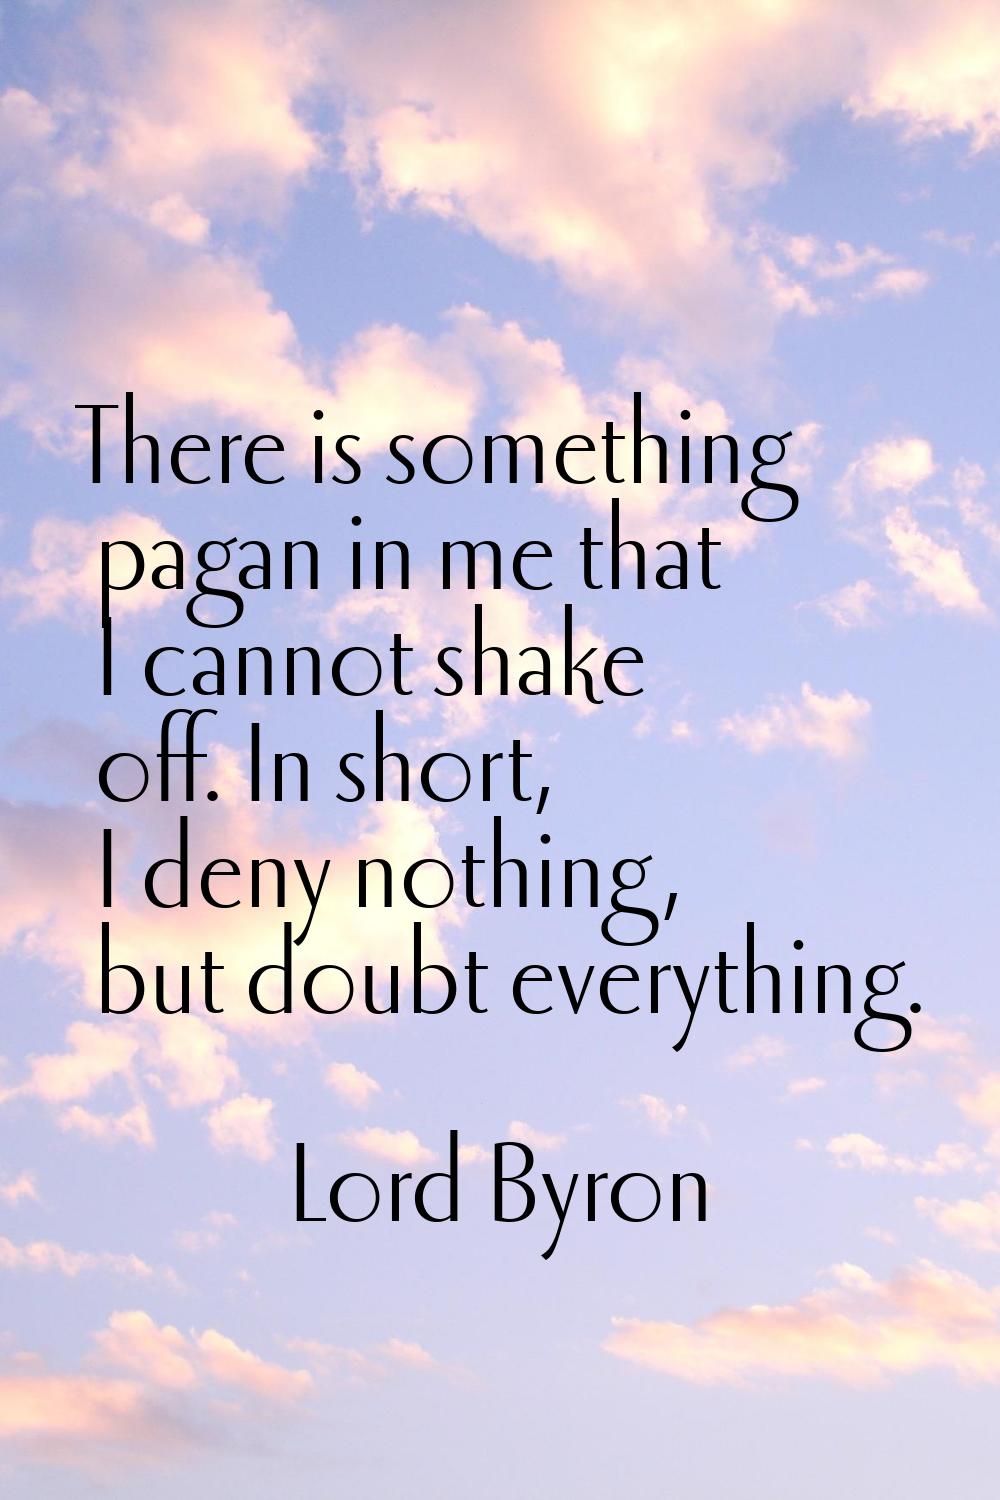 There is something pagan in me that I cannot shake off. In short, I deny nothing, but doubt everyth